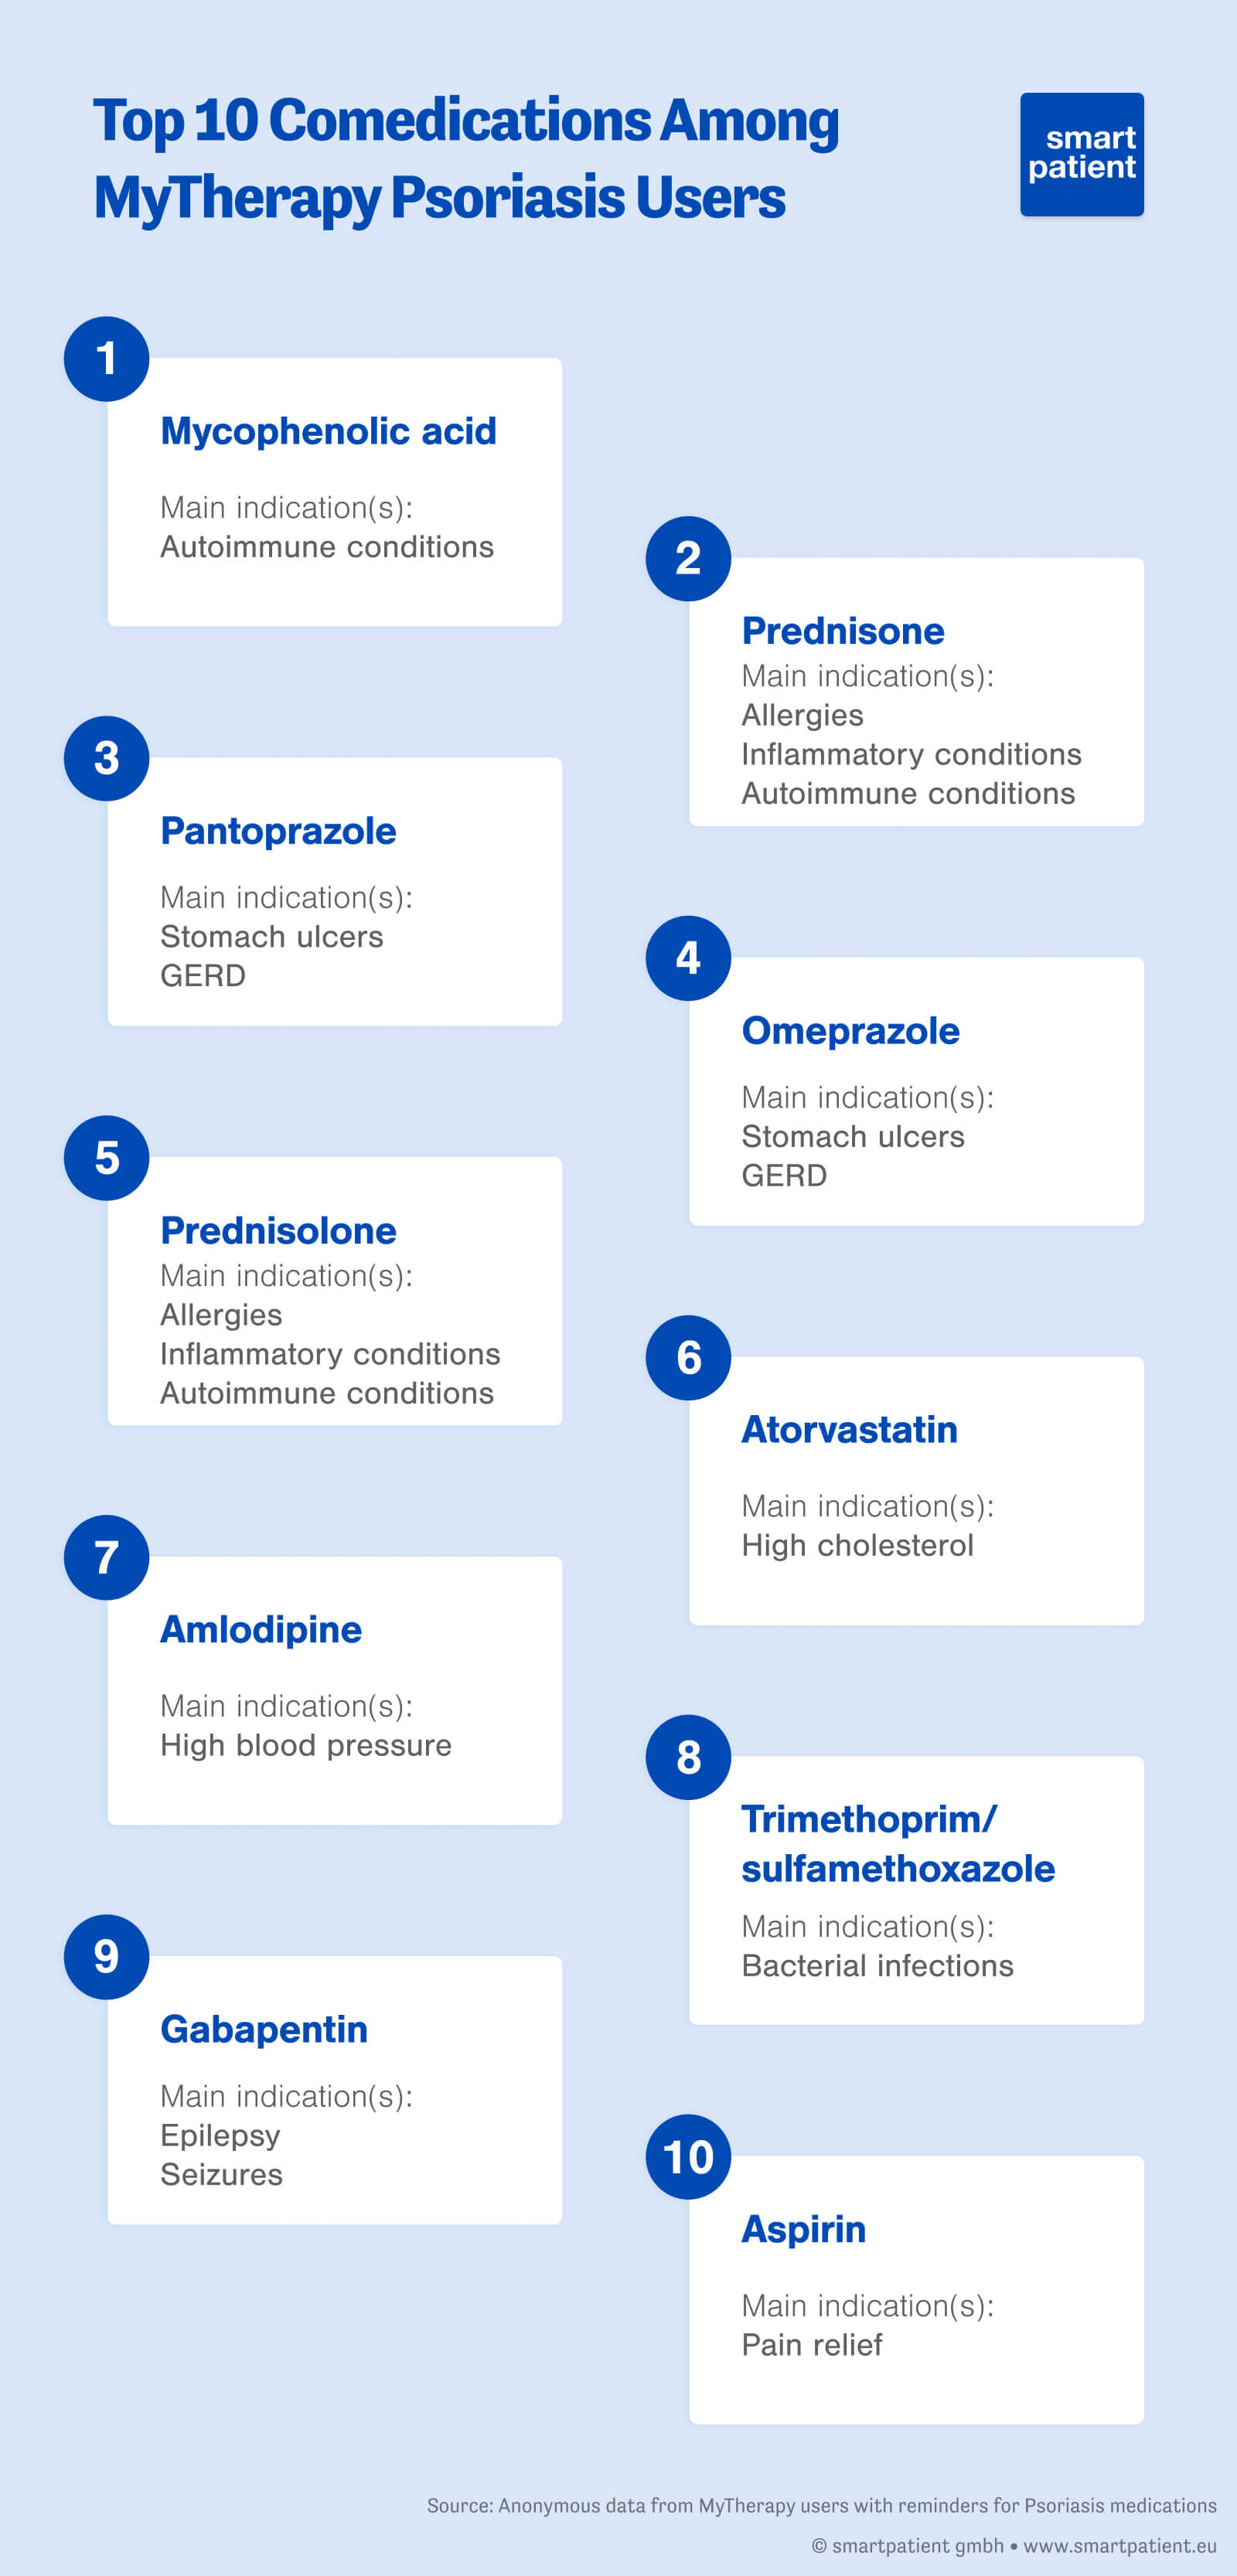 List of the top 10 psoriasis comedications among MyTherapy users